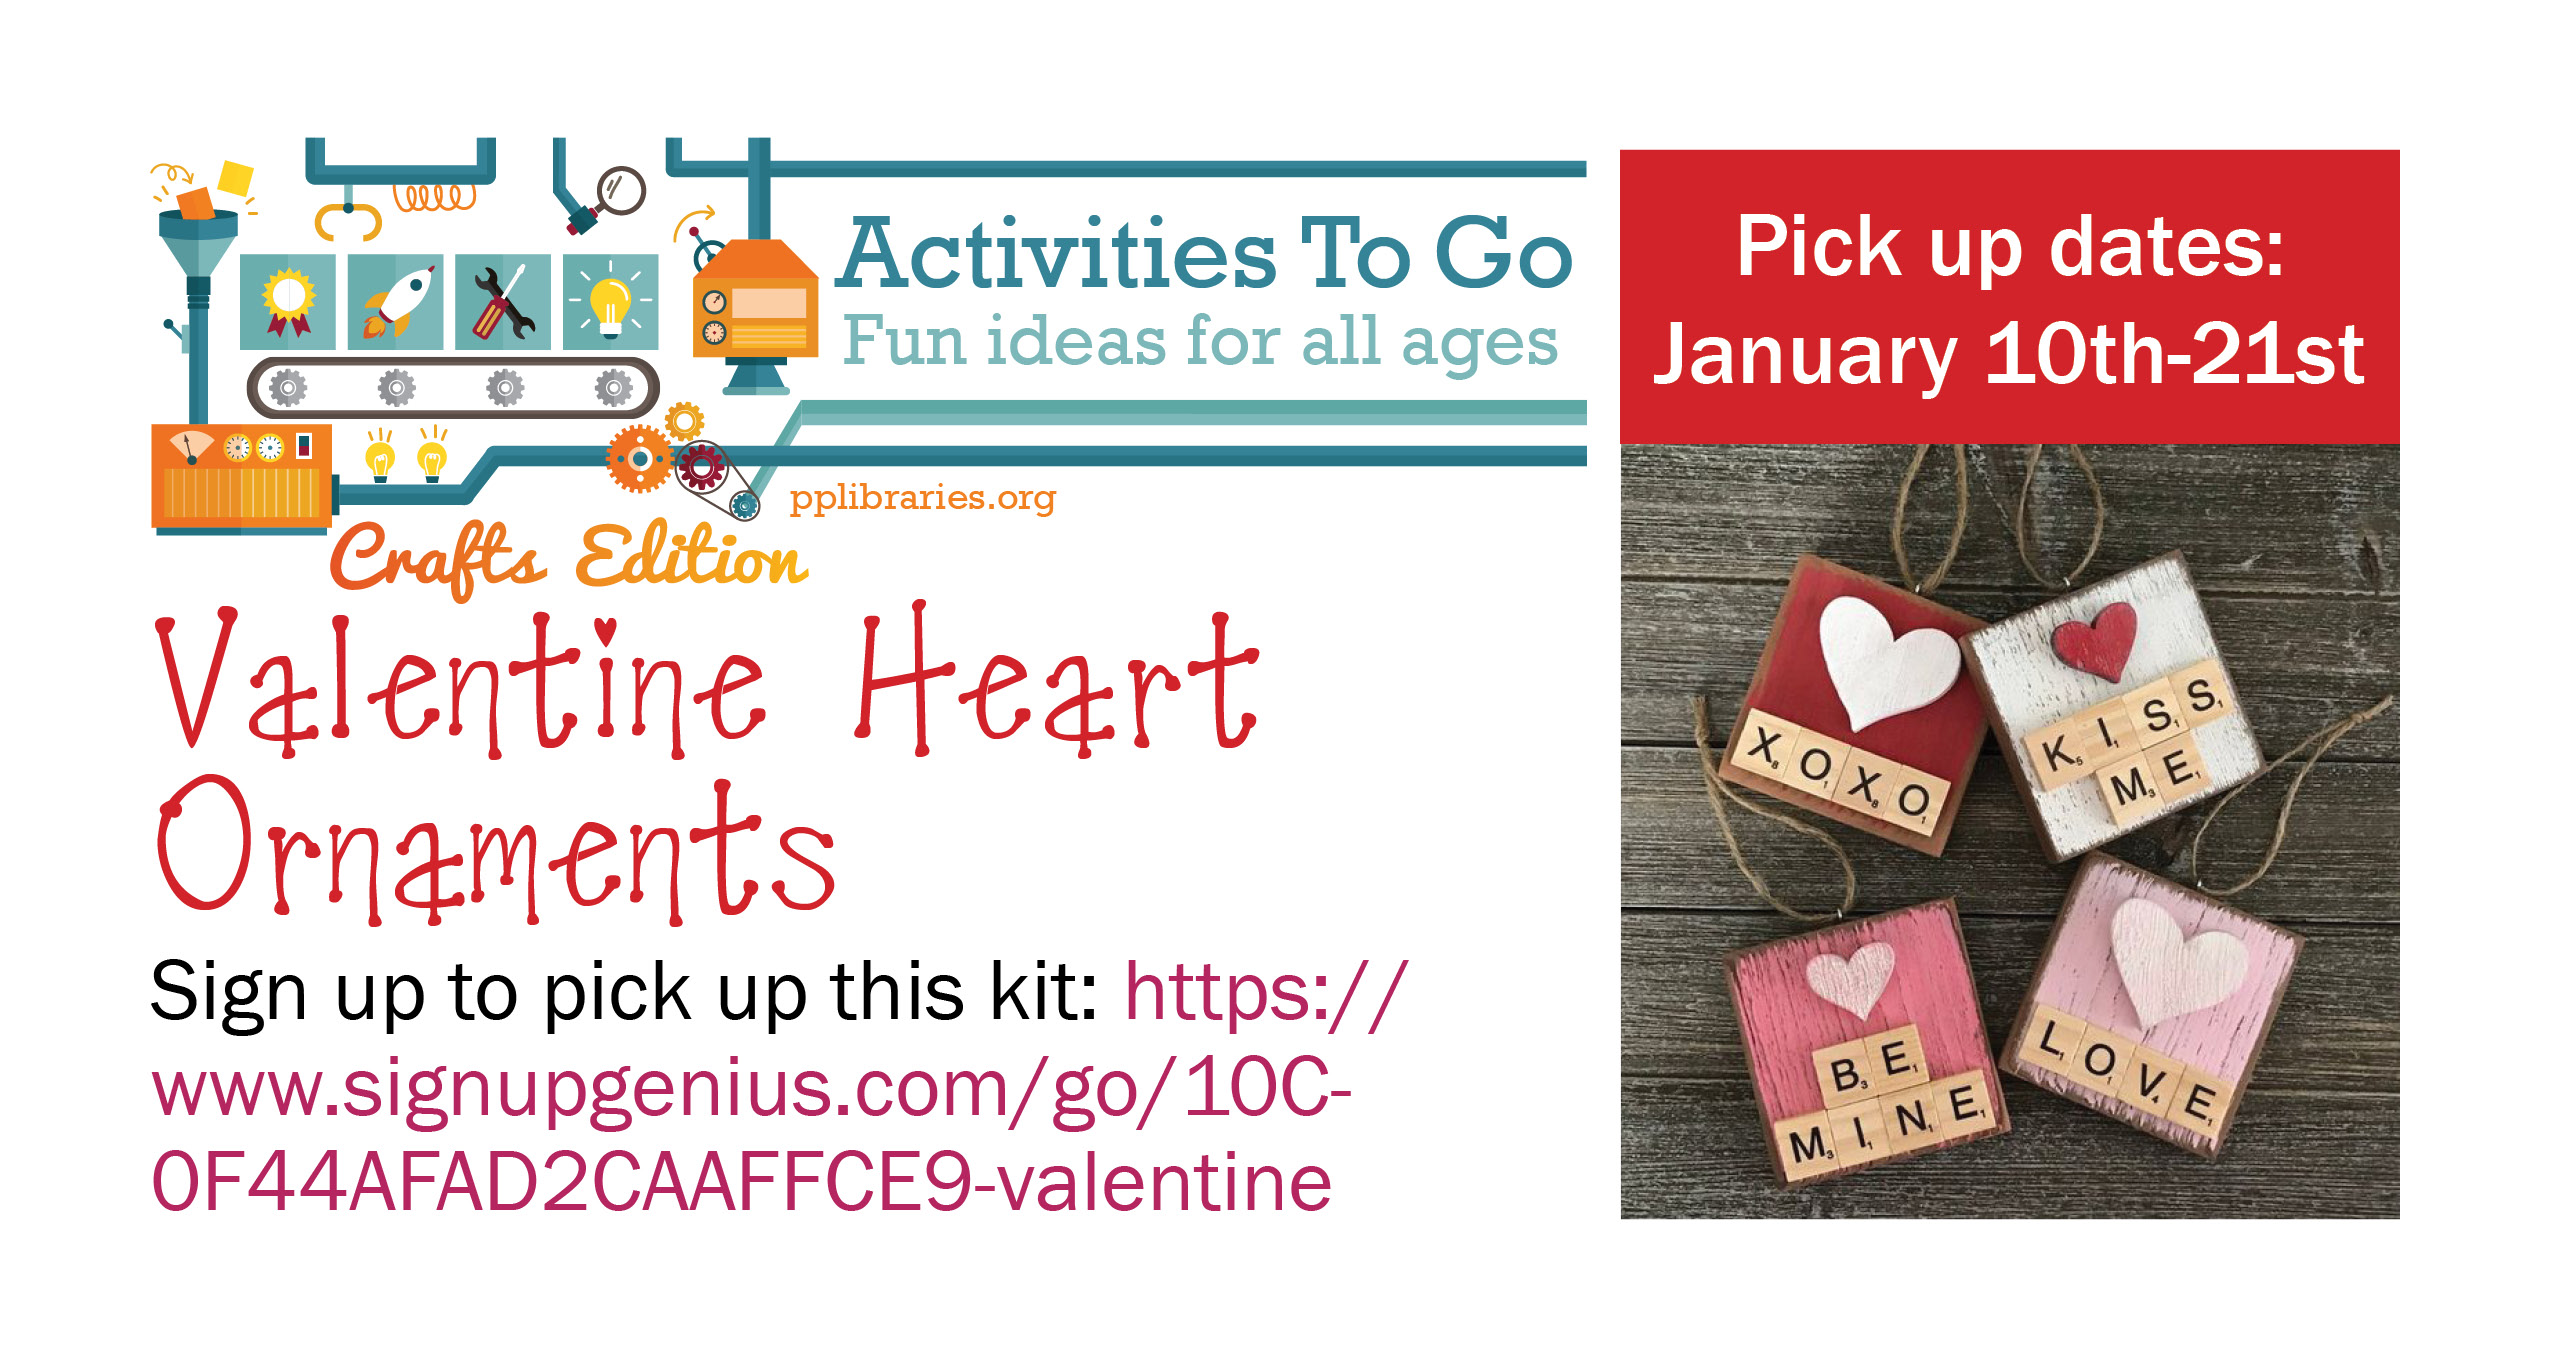 Valentine Heart Ornament activities to go sign up